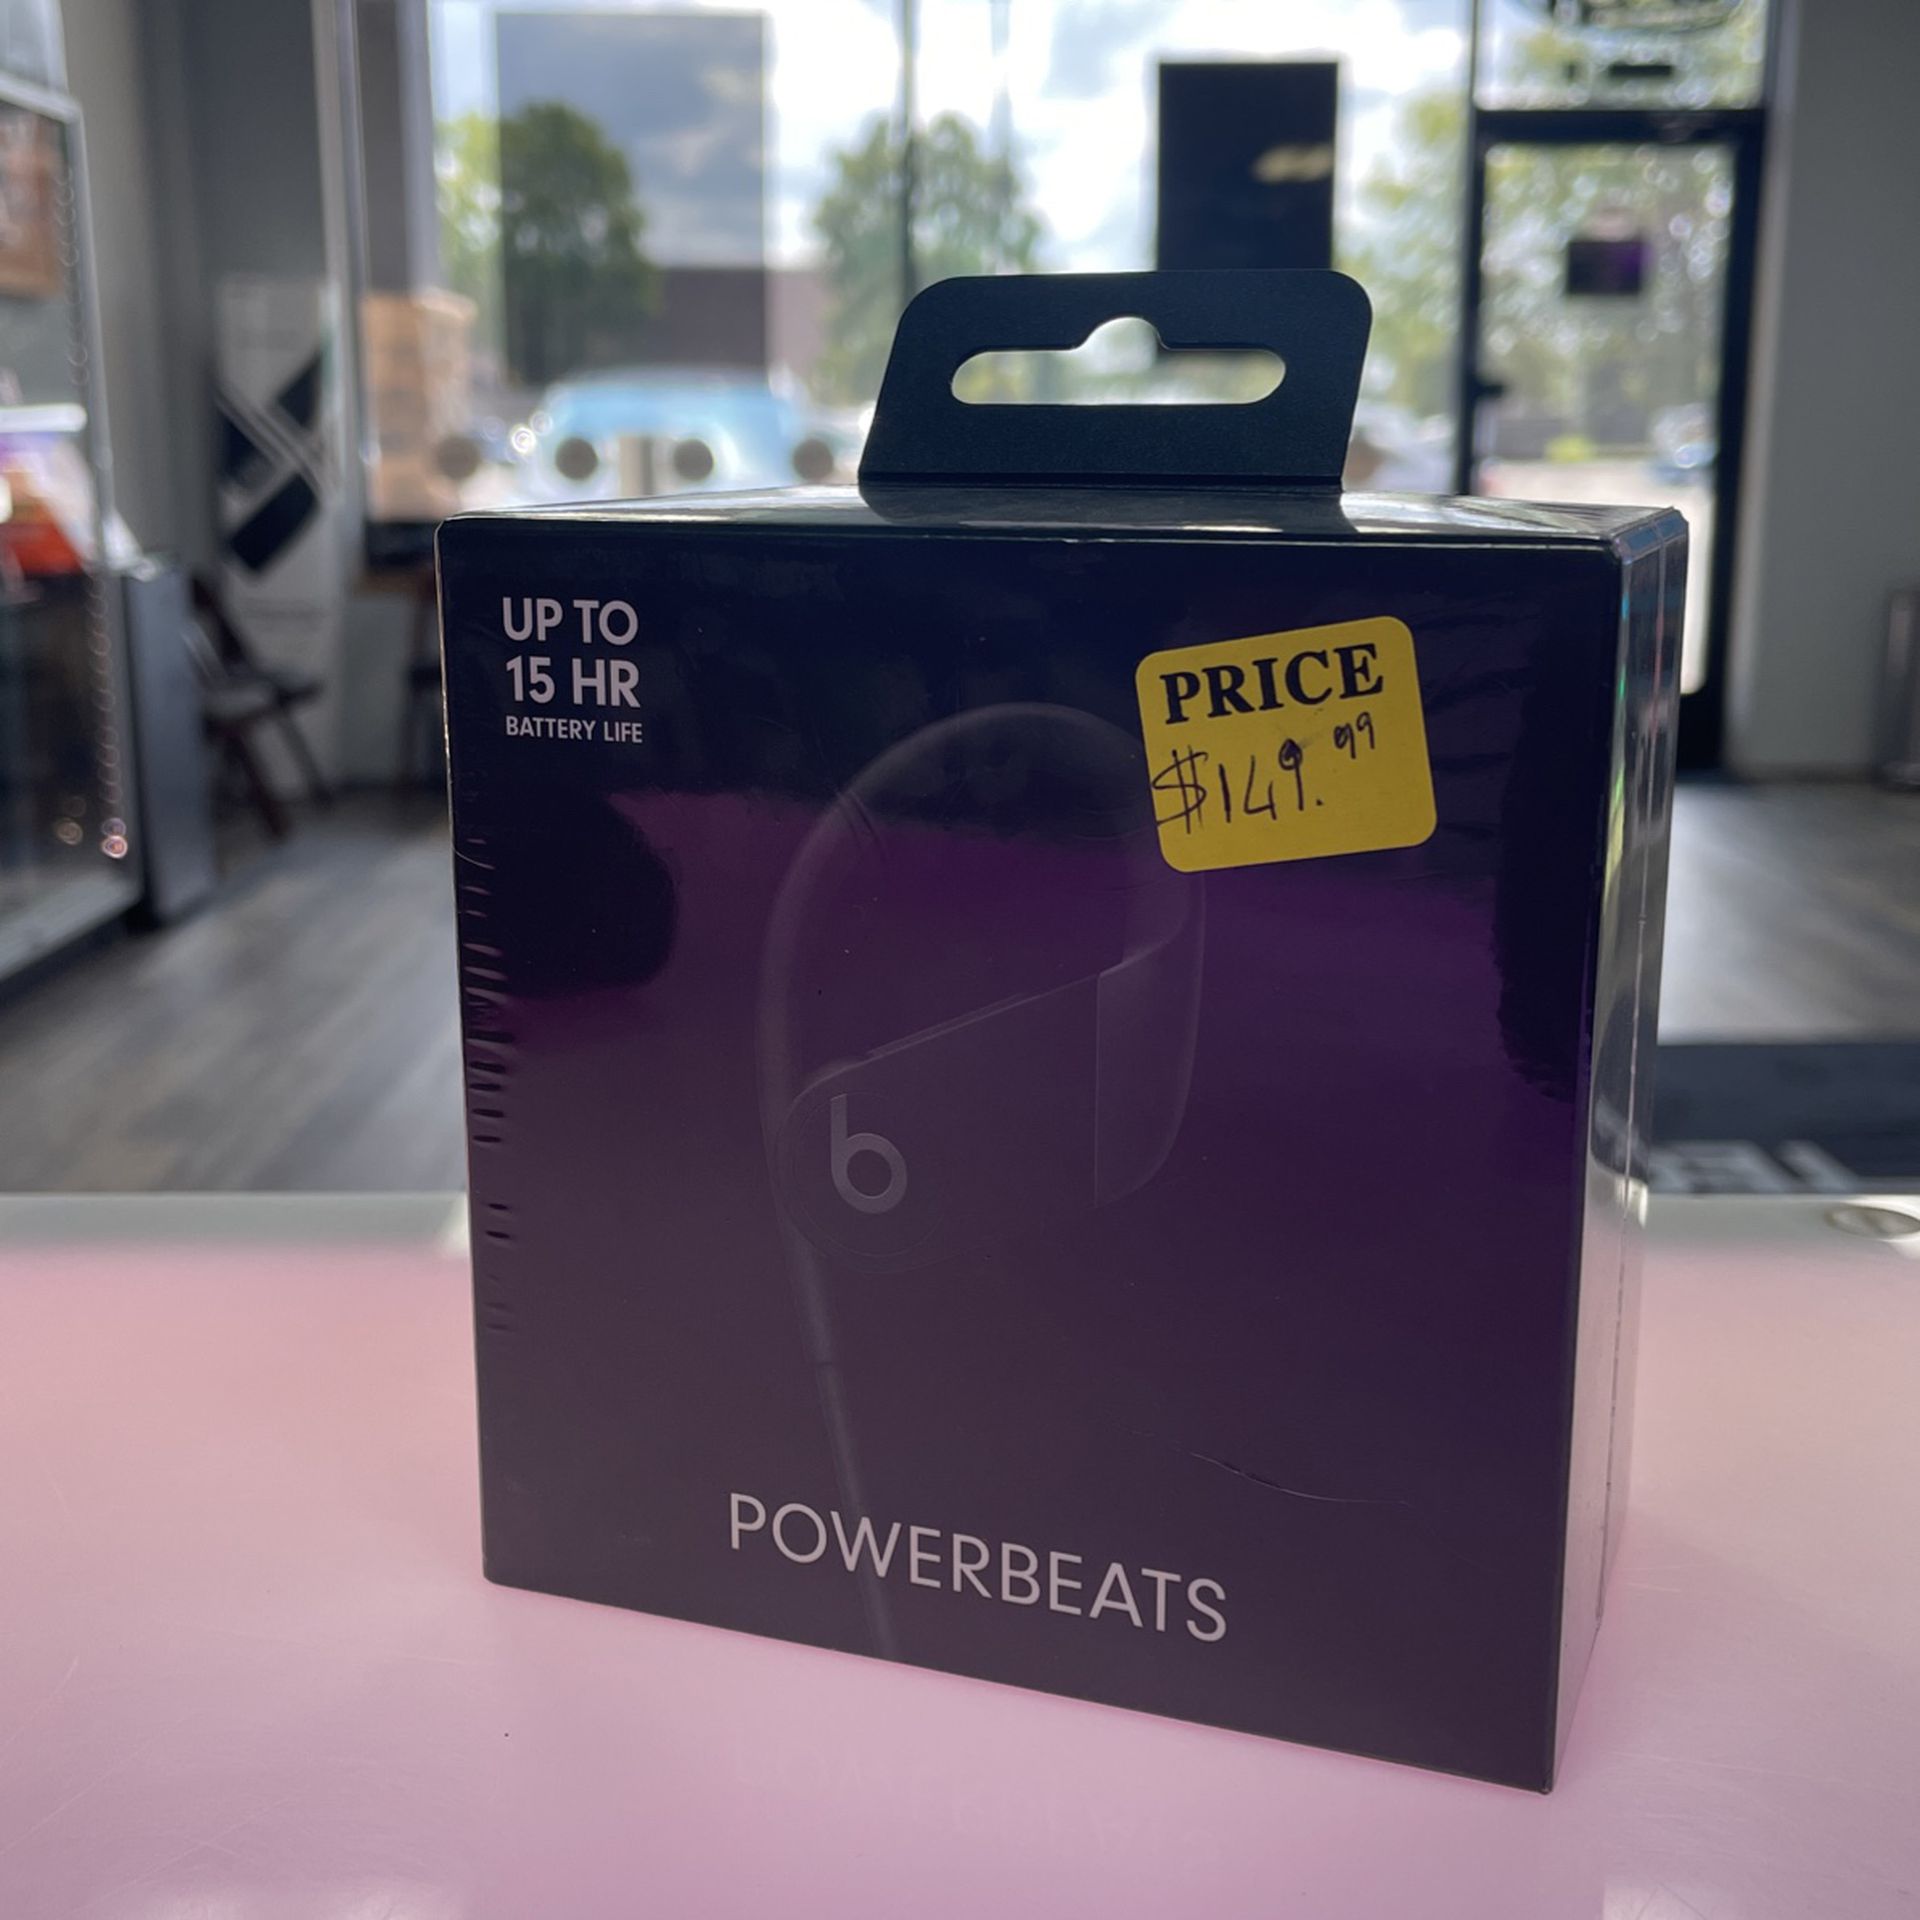 POWERBEATS Wireless High Performance Bluetooth Earphones With Carrying Case Brand New Sealed